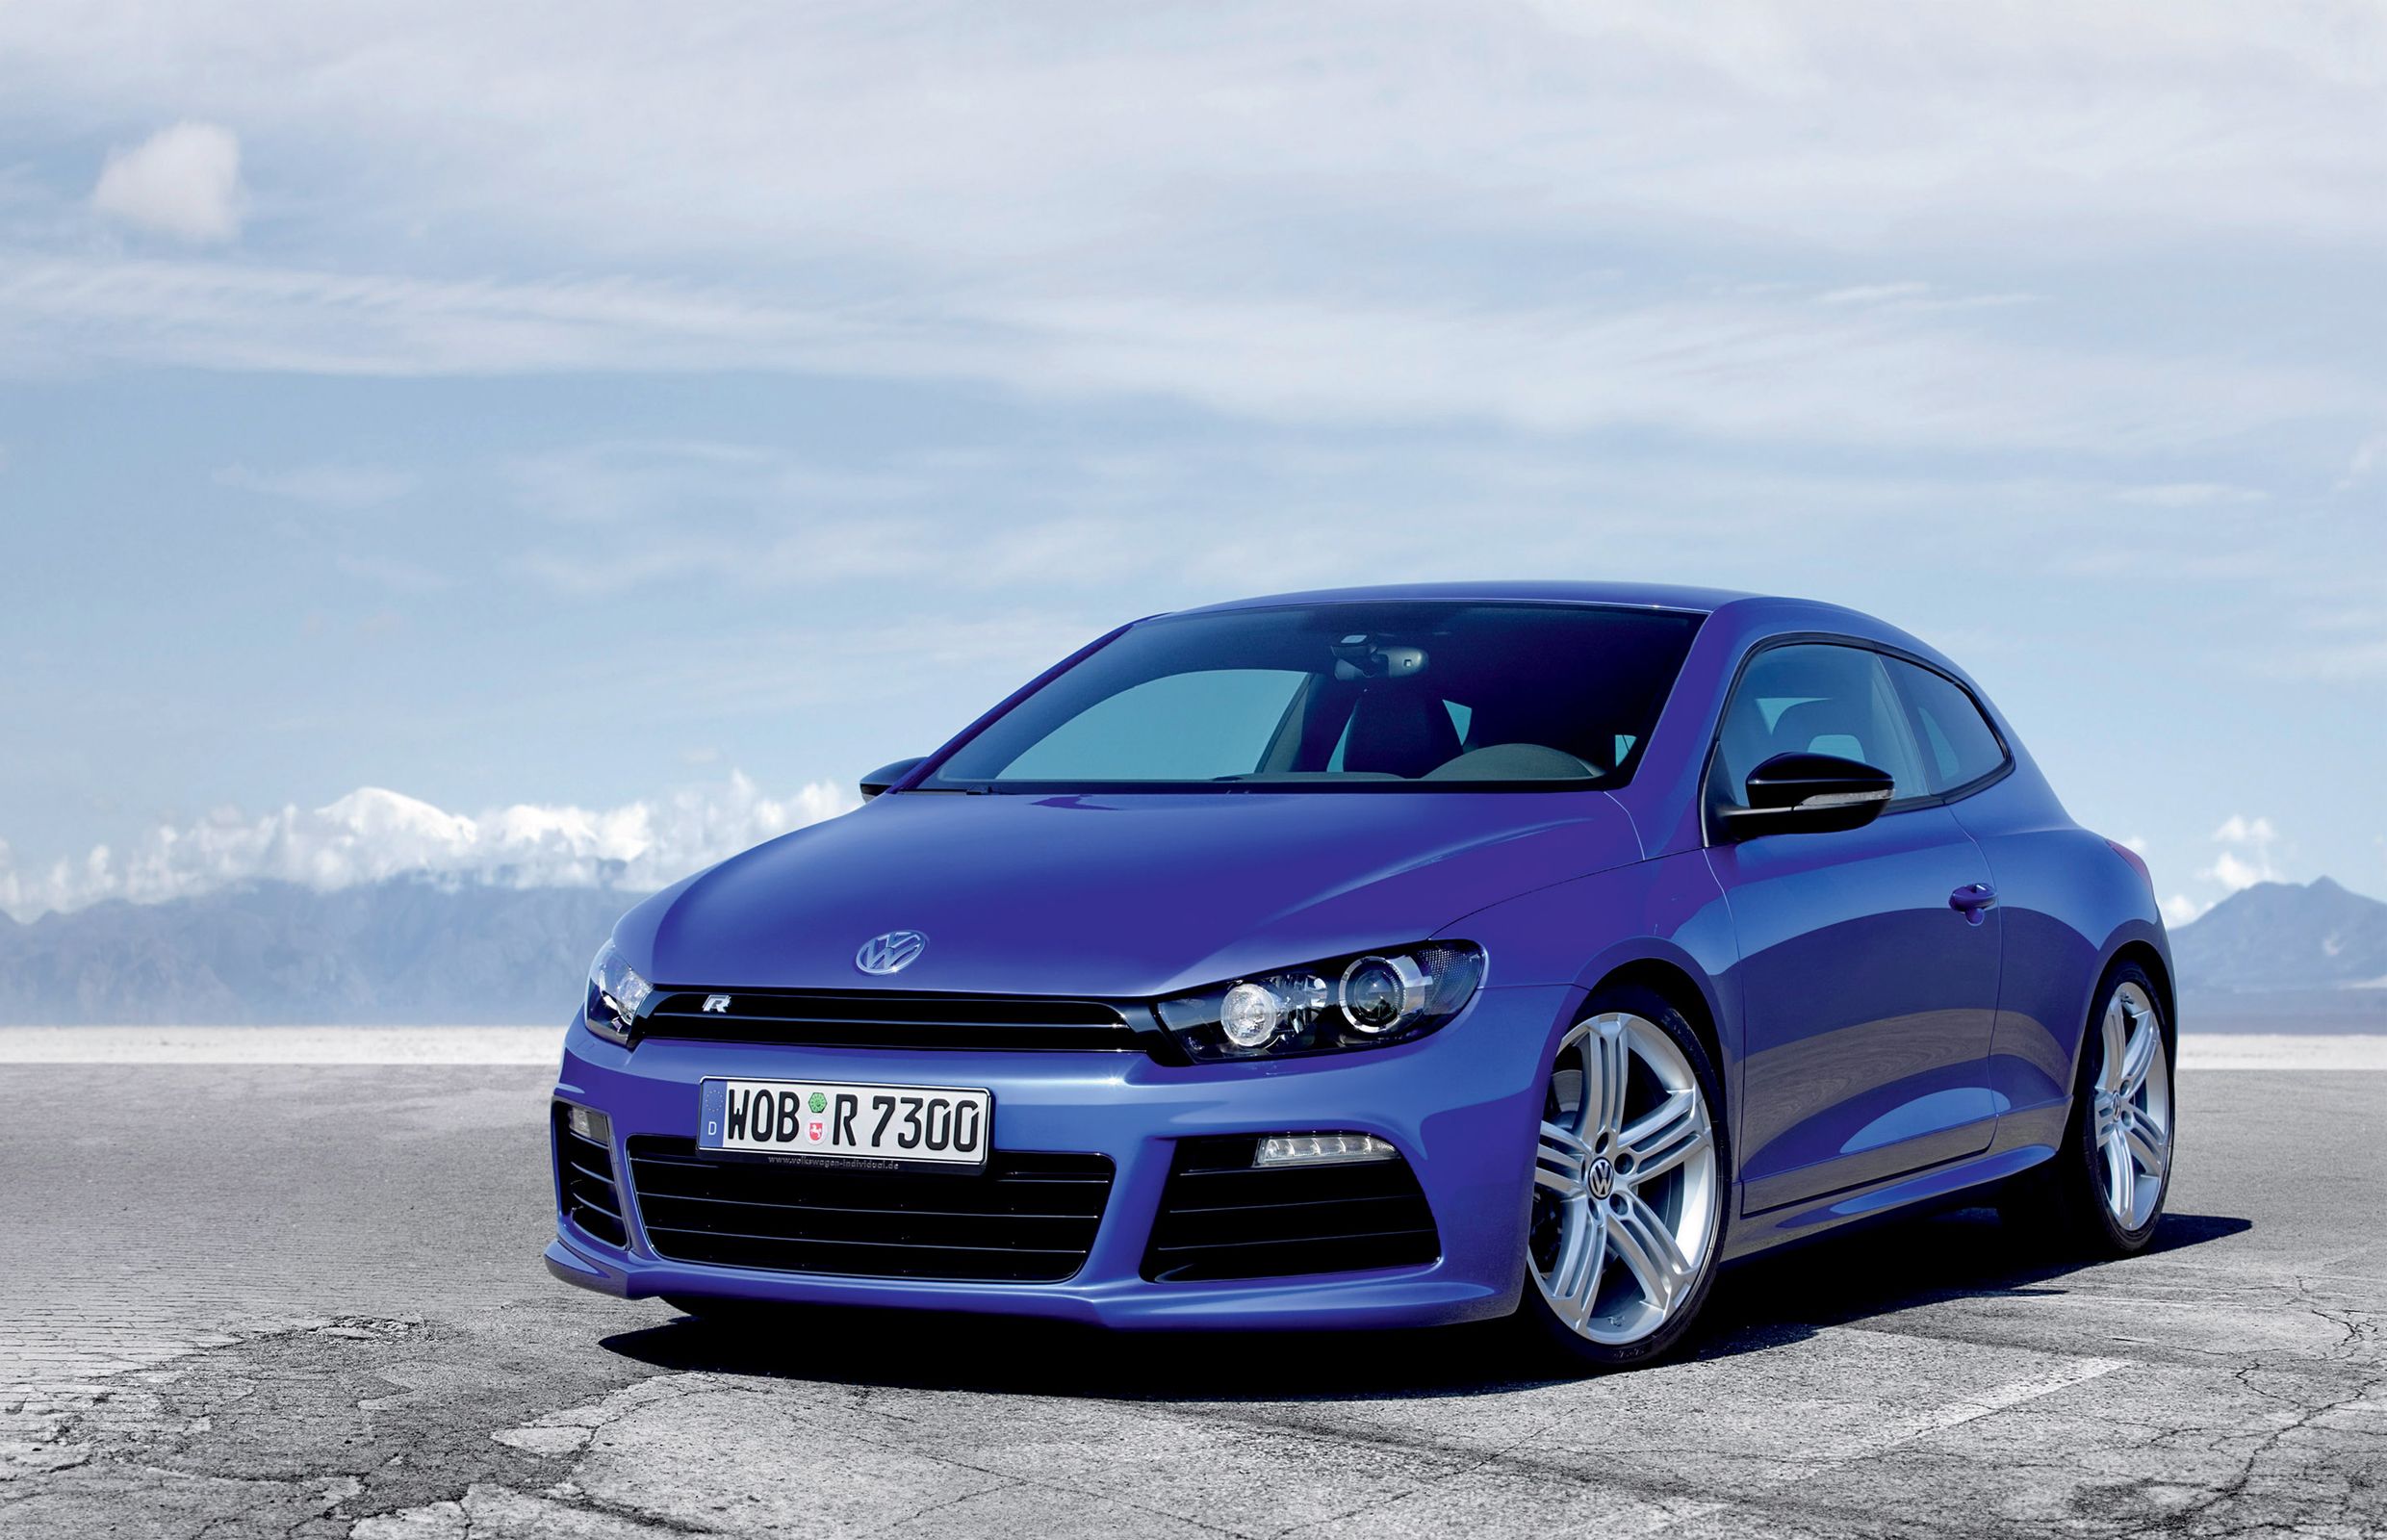 Will Volkswagen sell the next-generation Scirocco in North America?